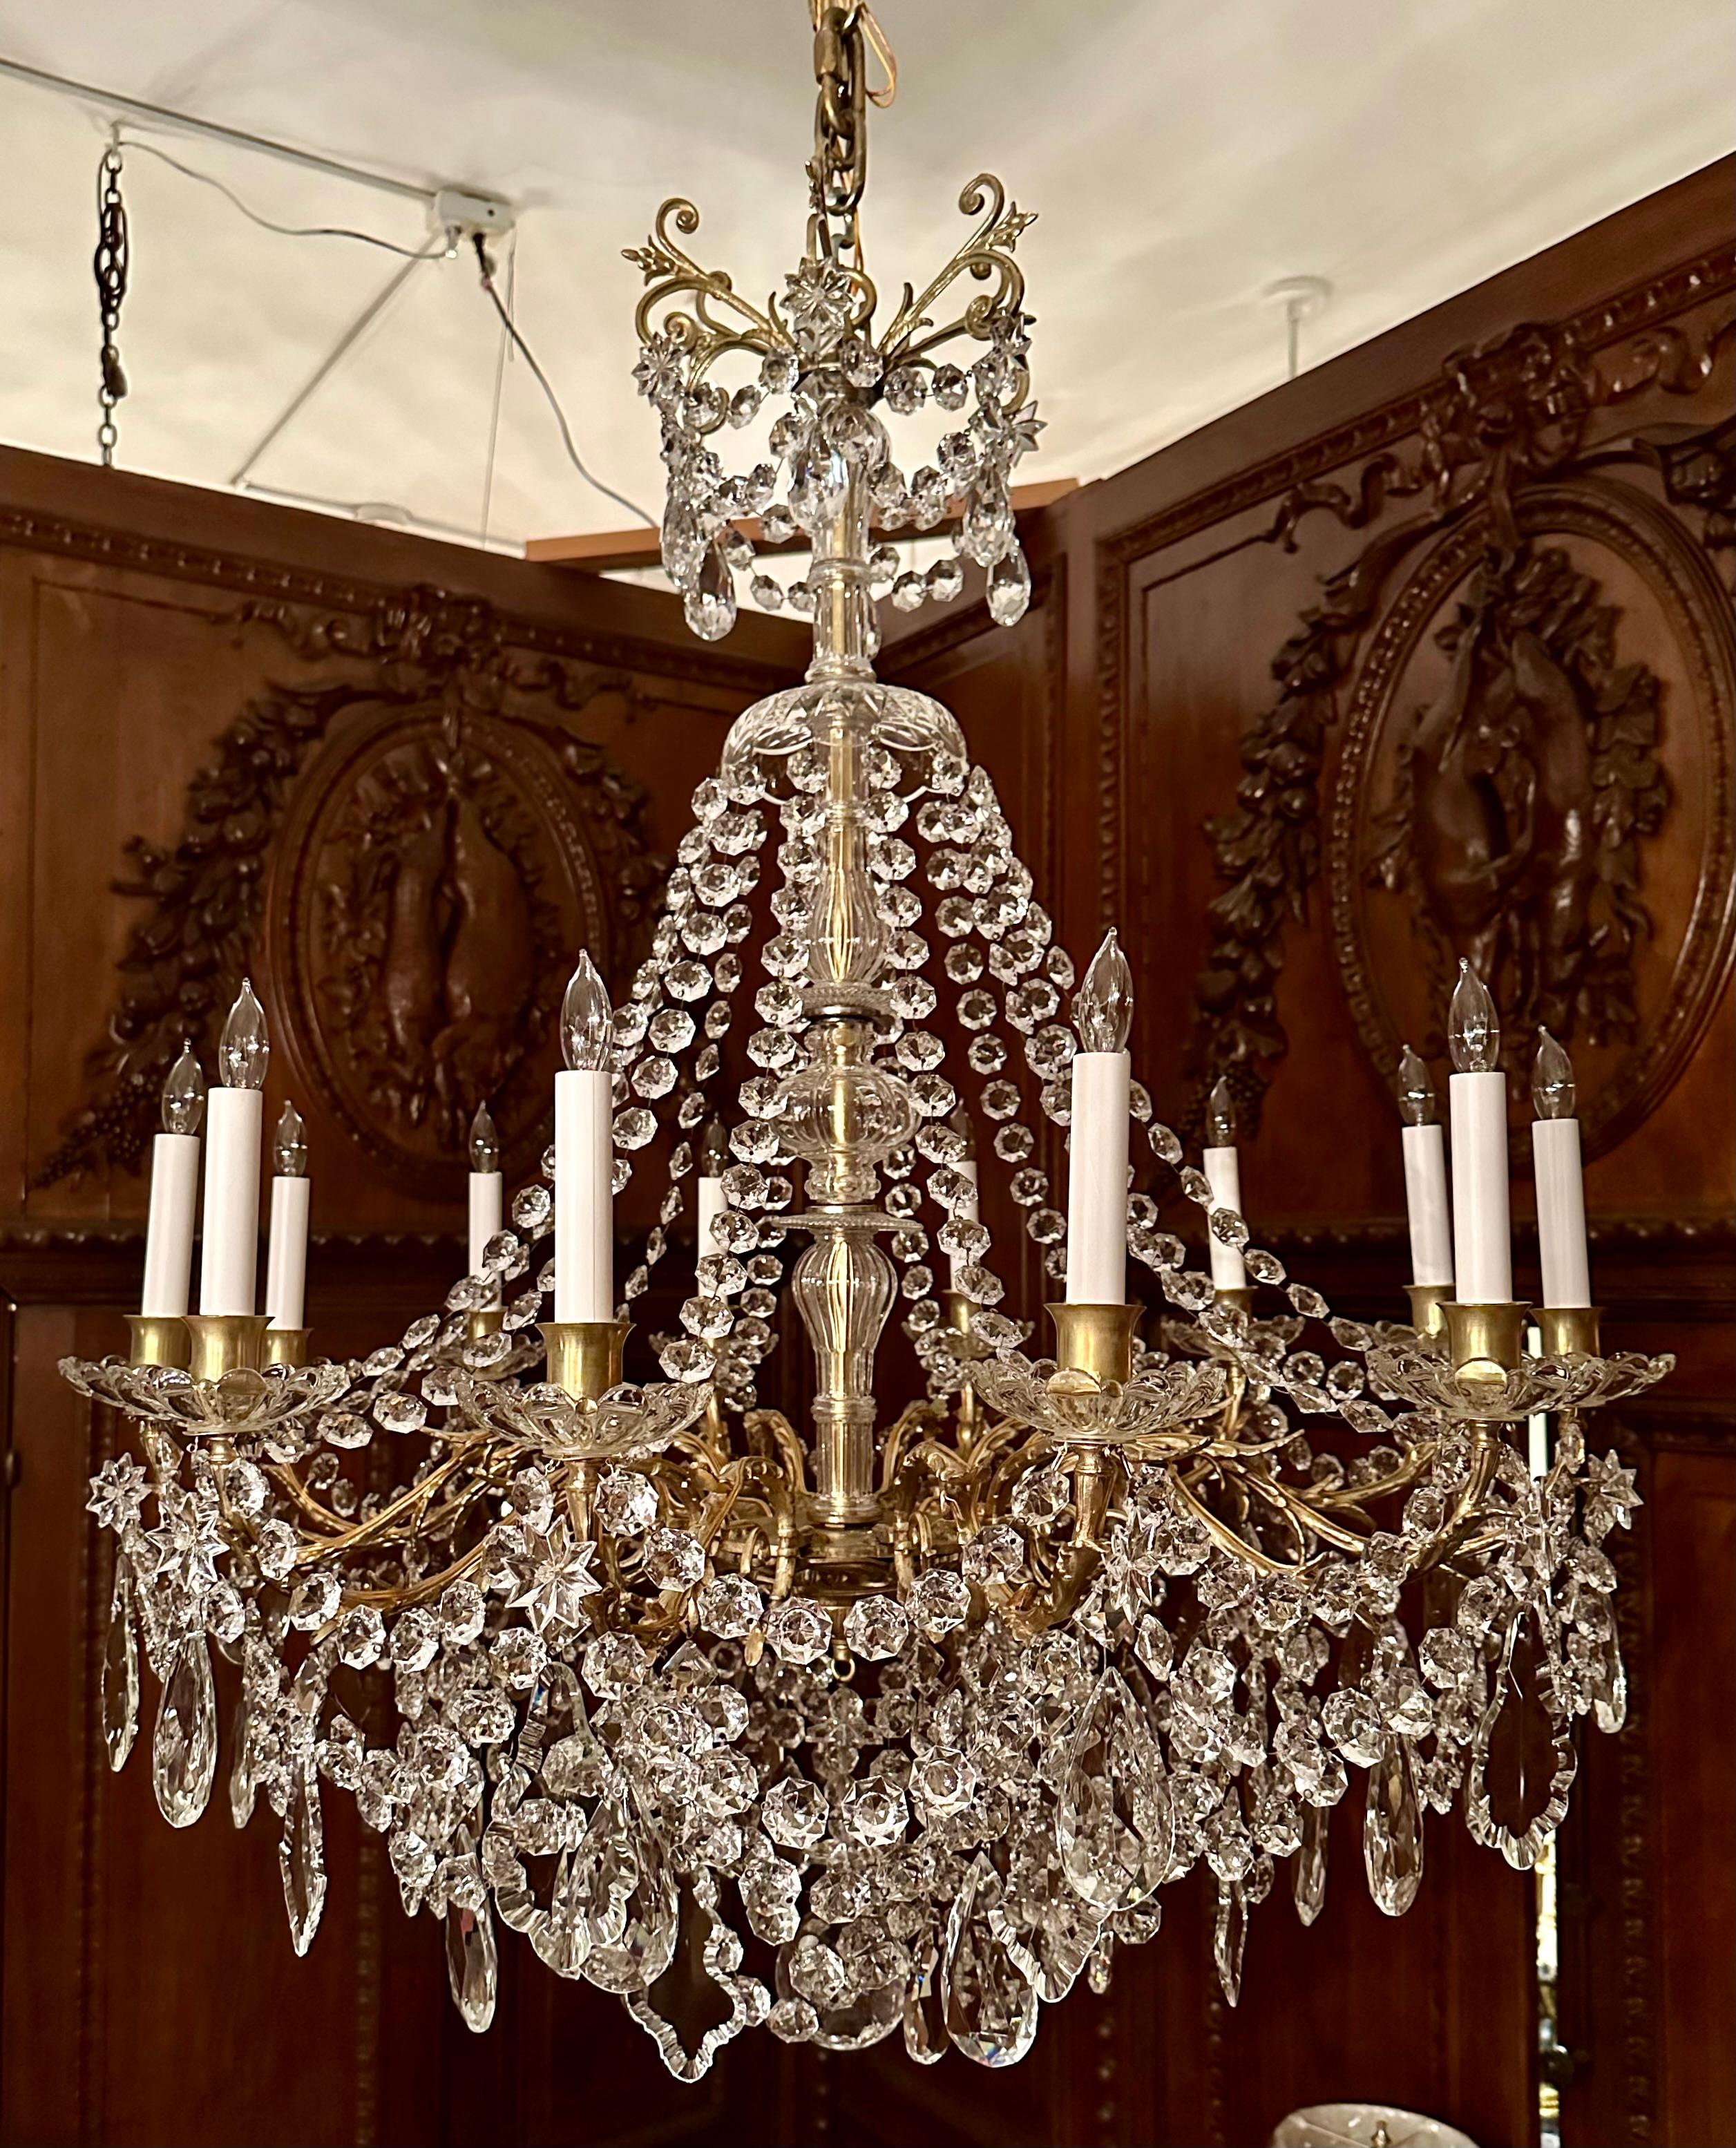 Antique French Gold Bronze and Baccarat Crystal 12 Light Chandelier, Circa 1890.
Heavily Draped with Cut Crystal Beading and Prisms.